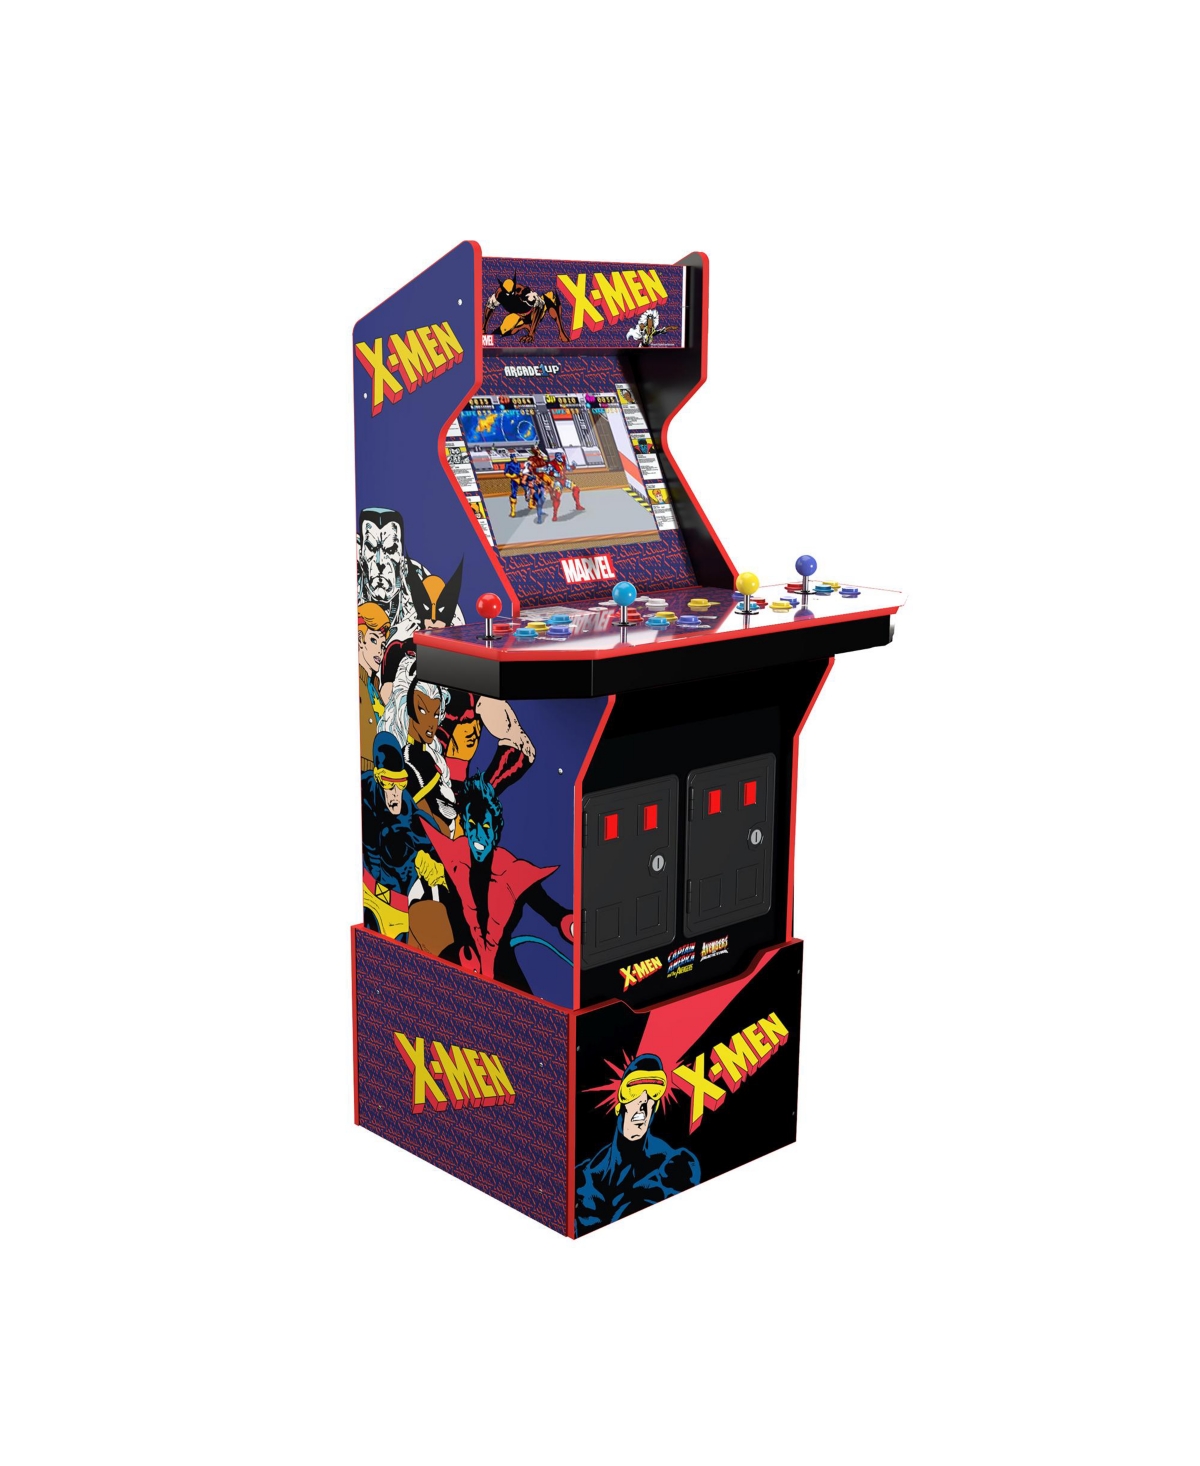 Arcade 1UP X-Men 4 Player Arcade Game, Stool Included